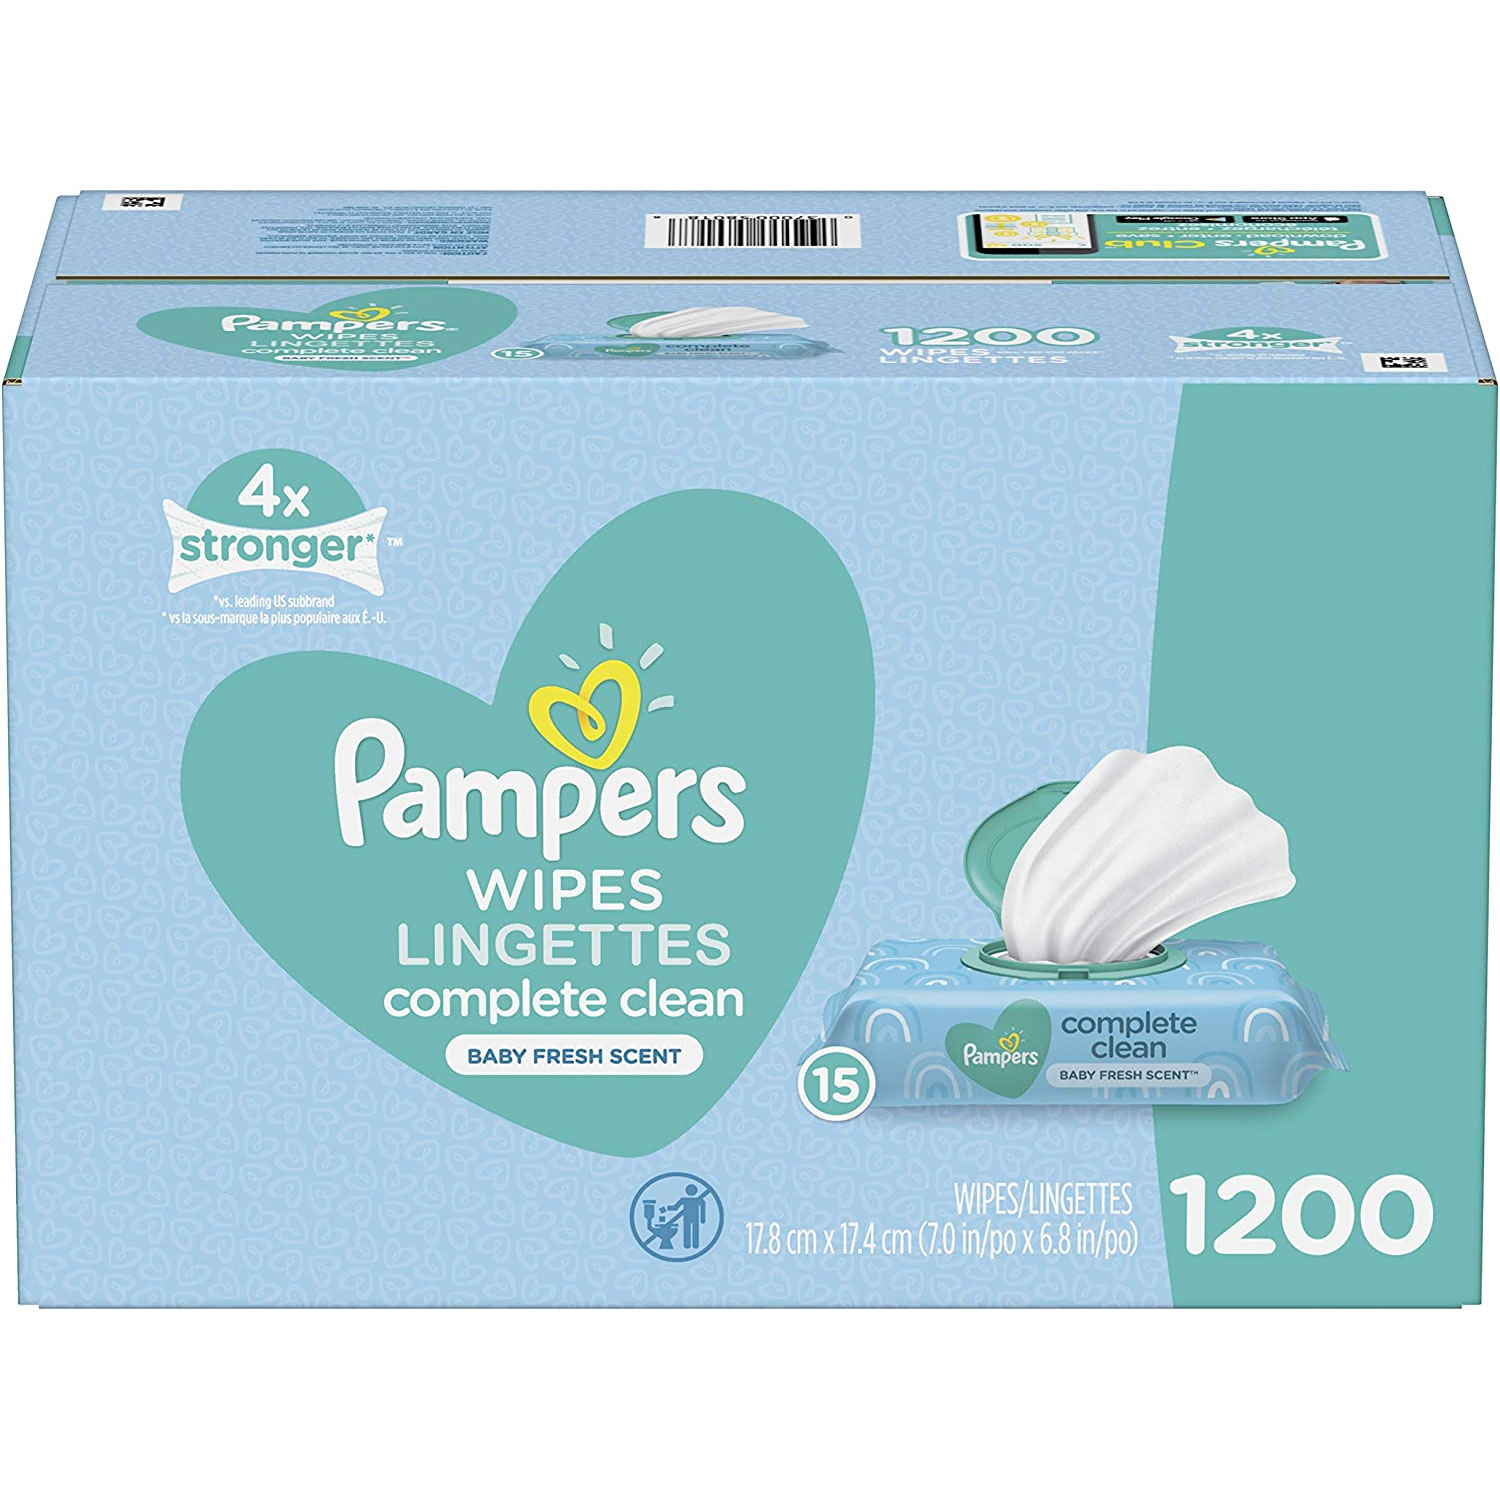 Amazon：Pampers Baby Wipes (1200 count)只卖$19.98